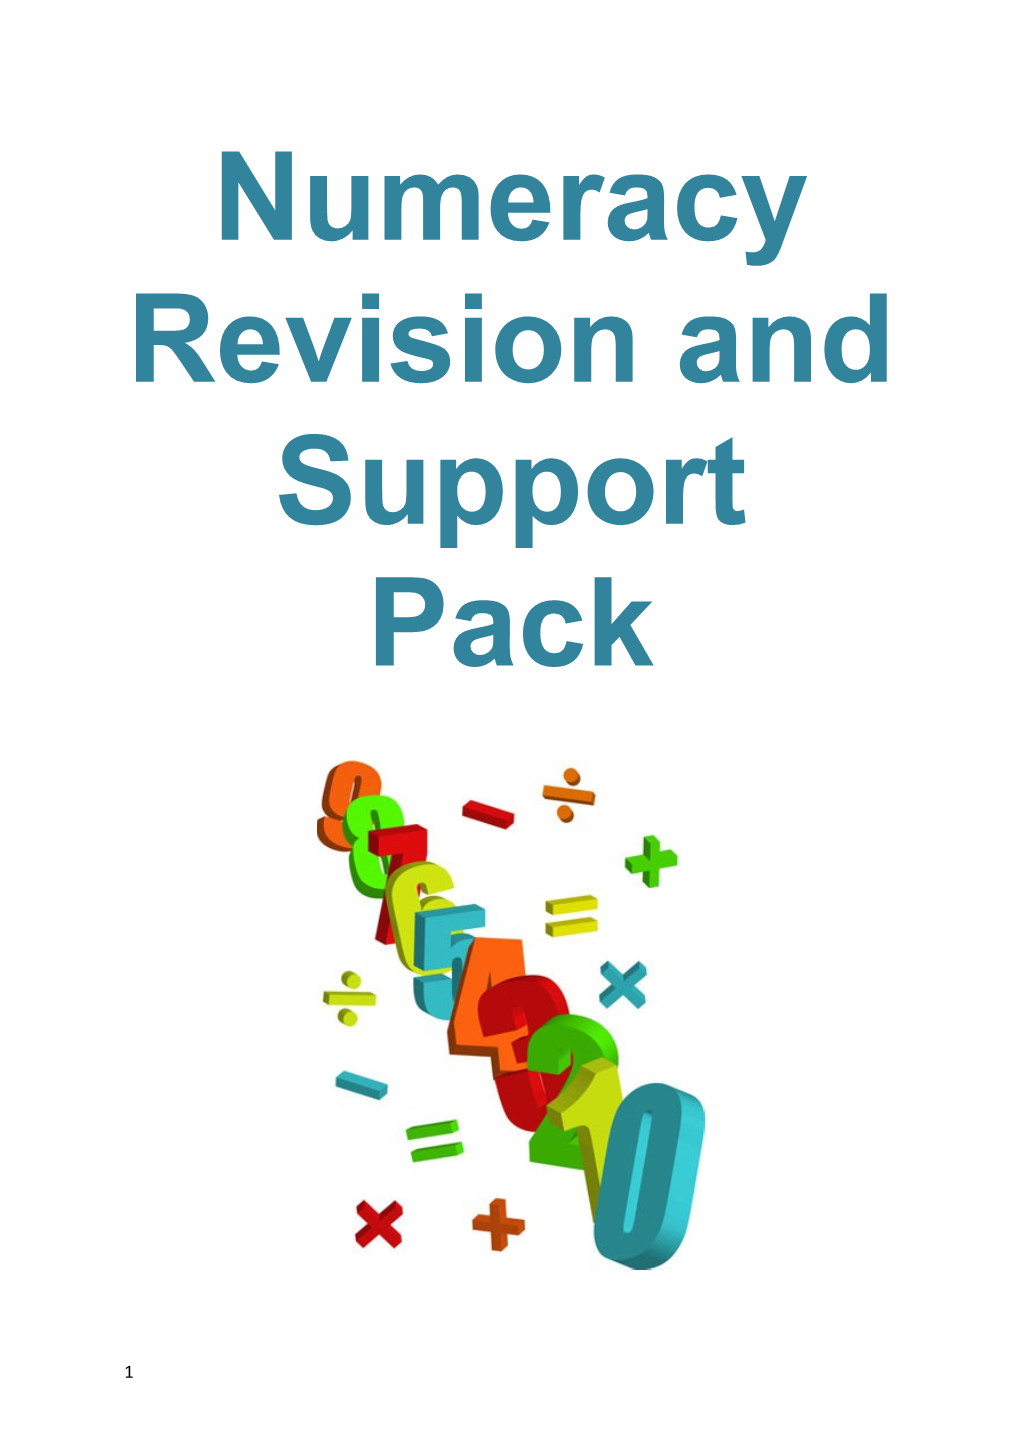 Numeracy Revision and Support Pack